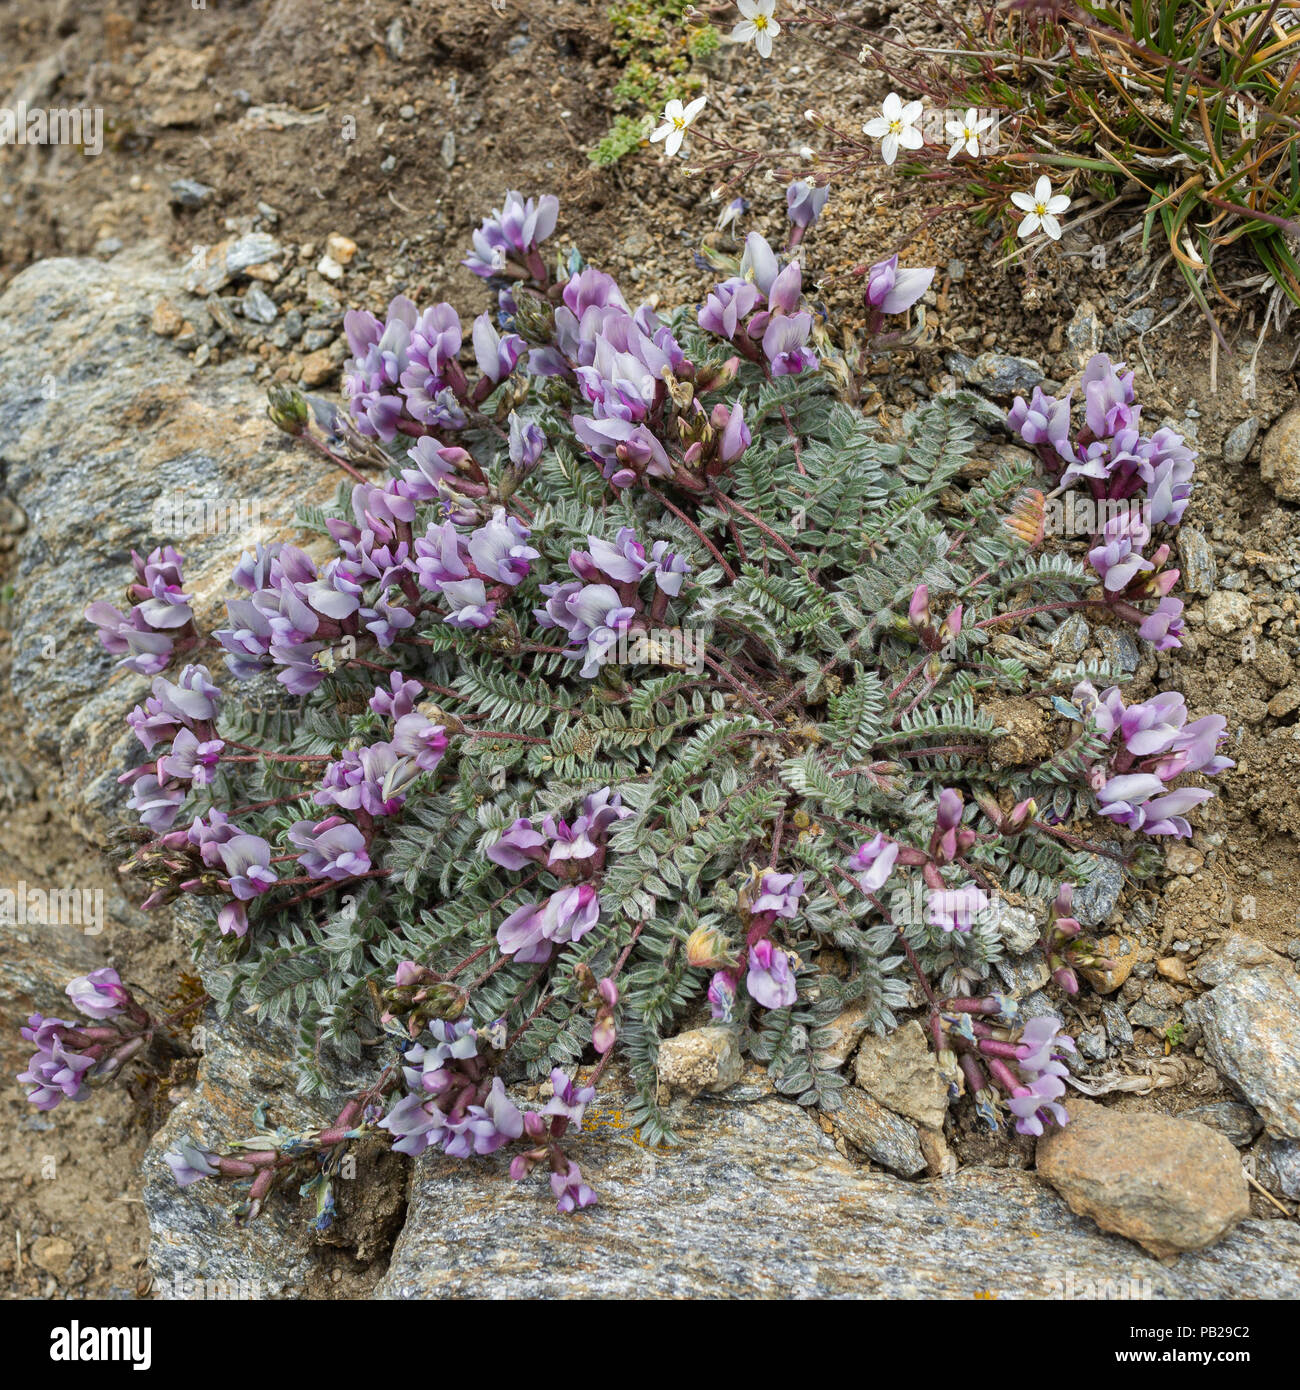 Alpine flower Oxytropis helvetica (Astragalus gaudinii ), Aosta valley, Italy. Photo taken at an altitude of 2700 meters. Stock Photo